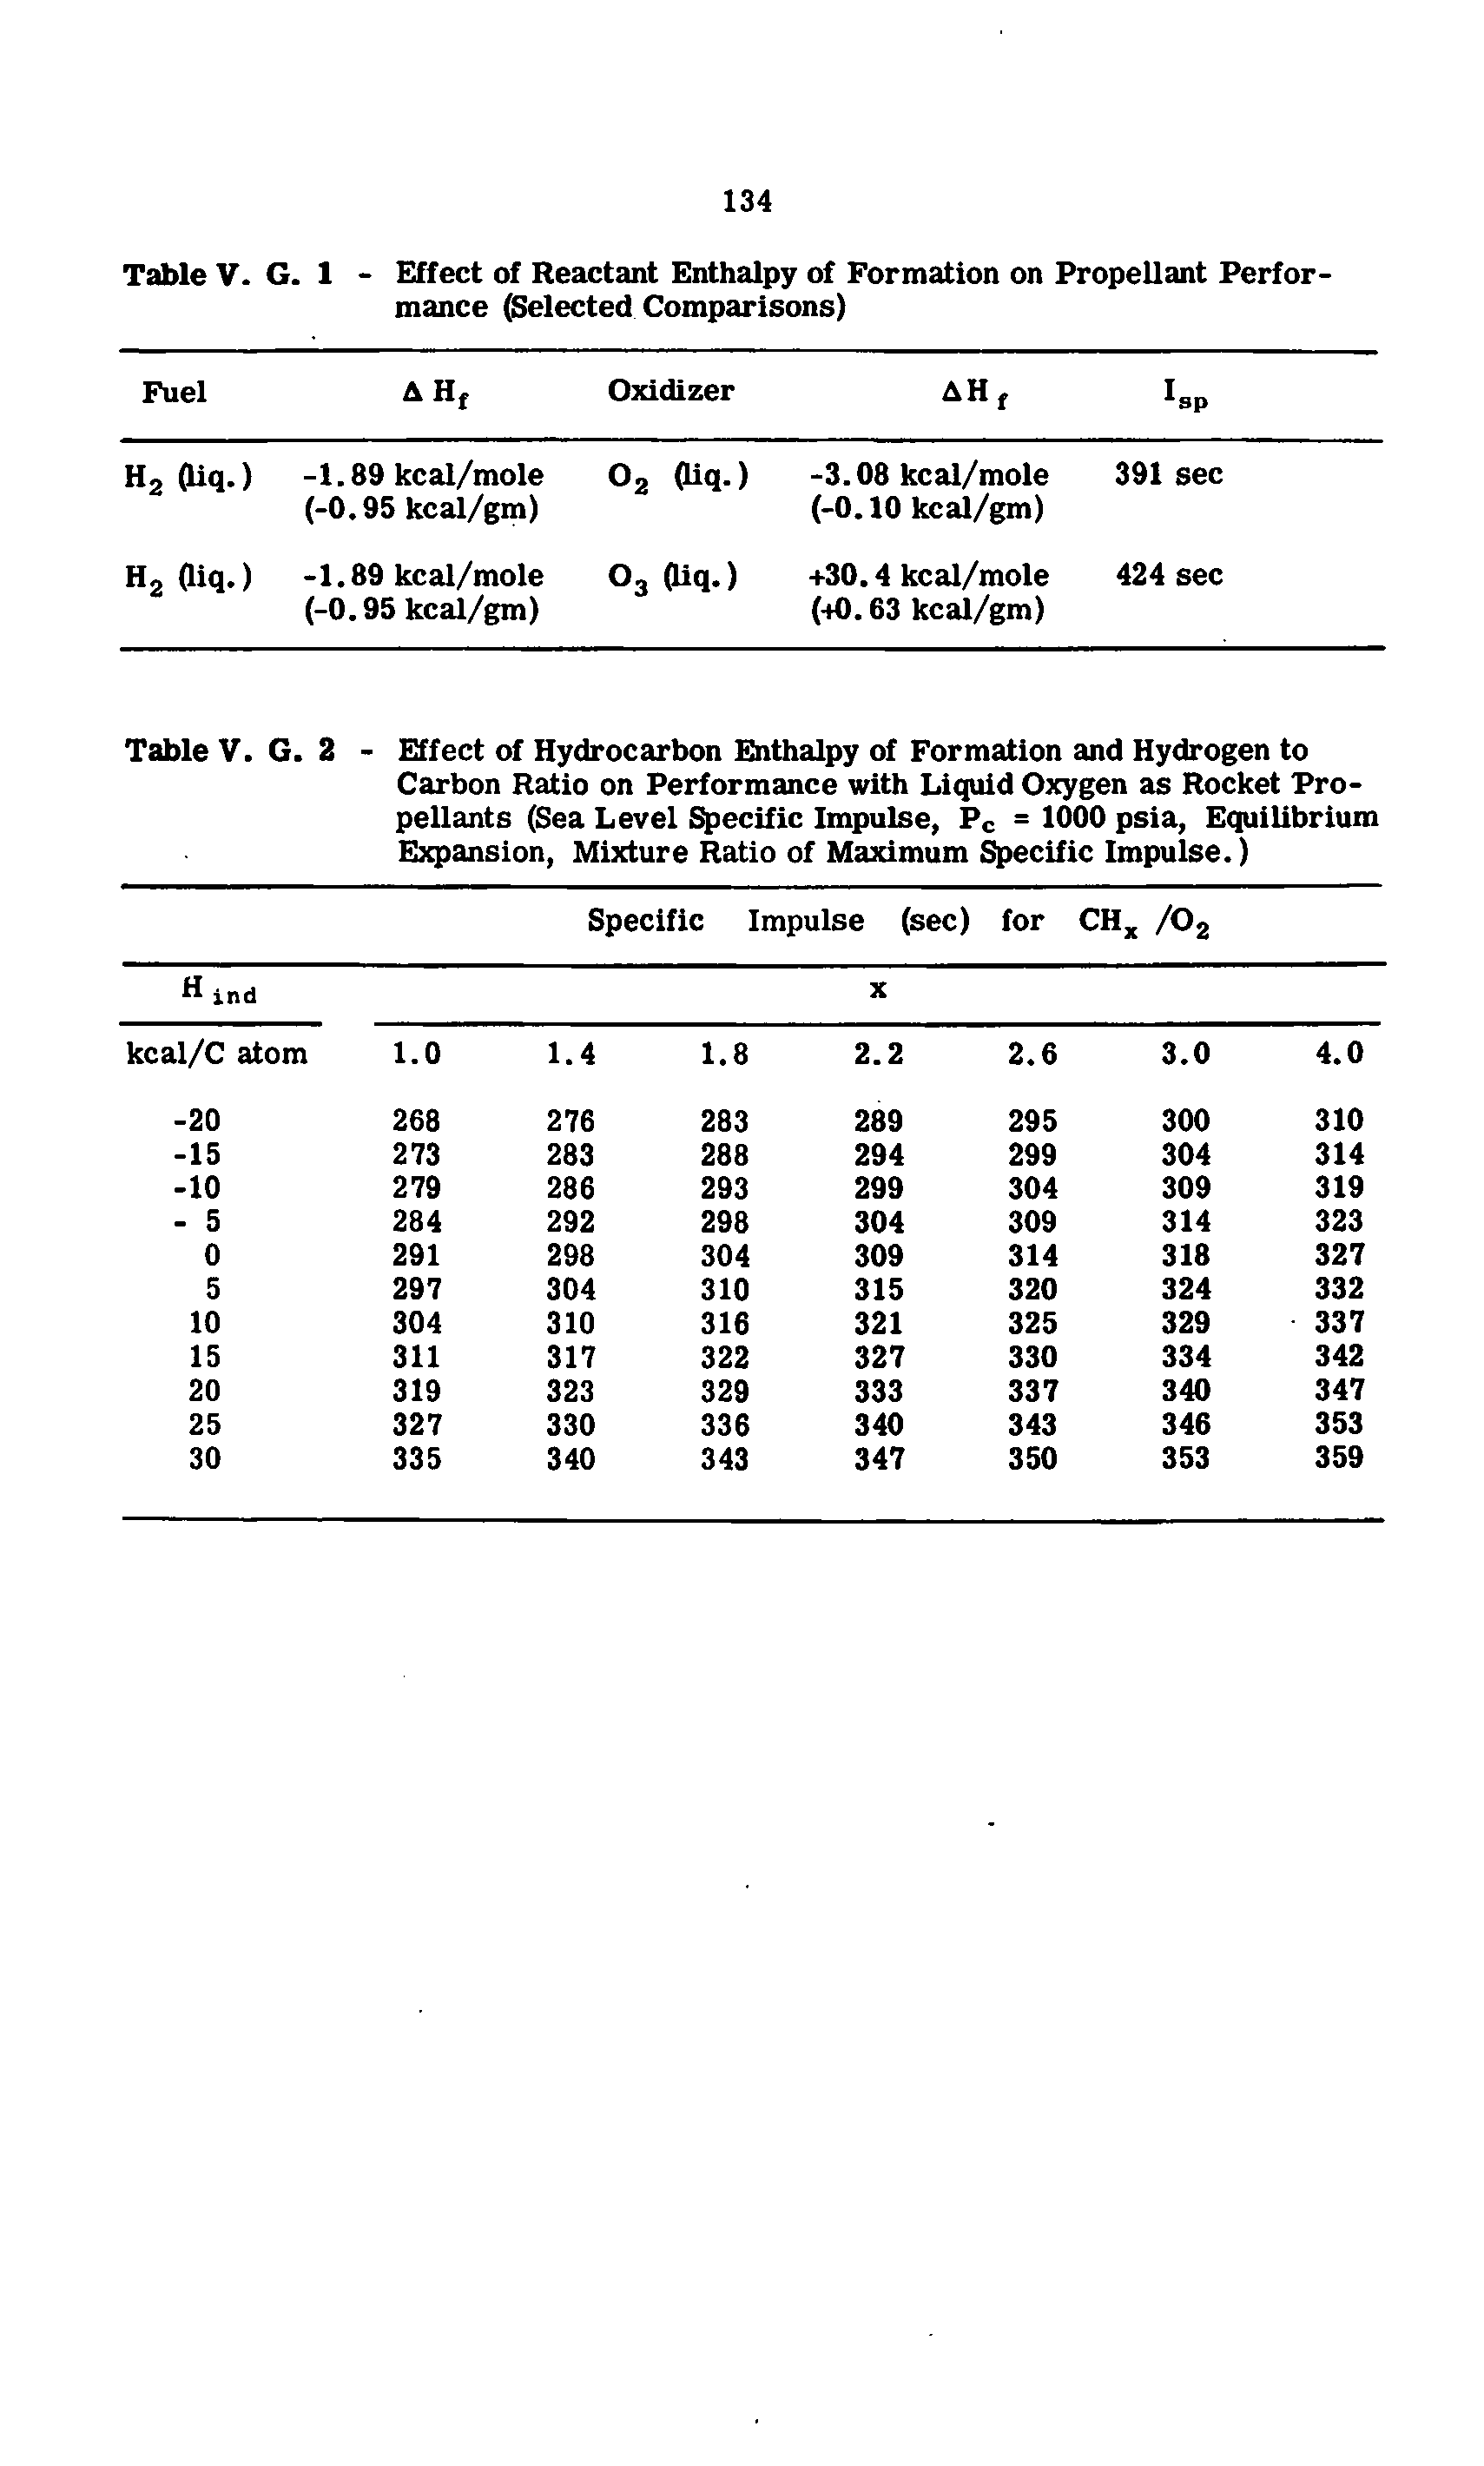 Table V. G. 2 - Effect of Hydrocarbon Enthalpy of Formation and Hydrogen to...